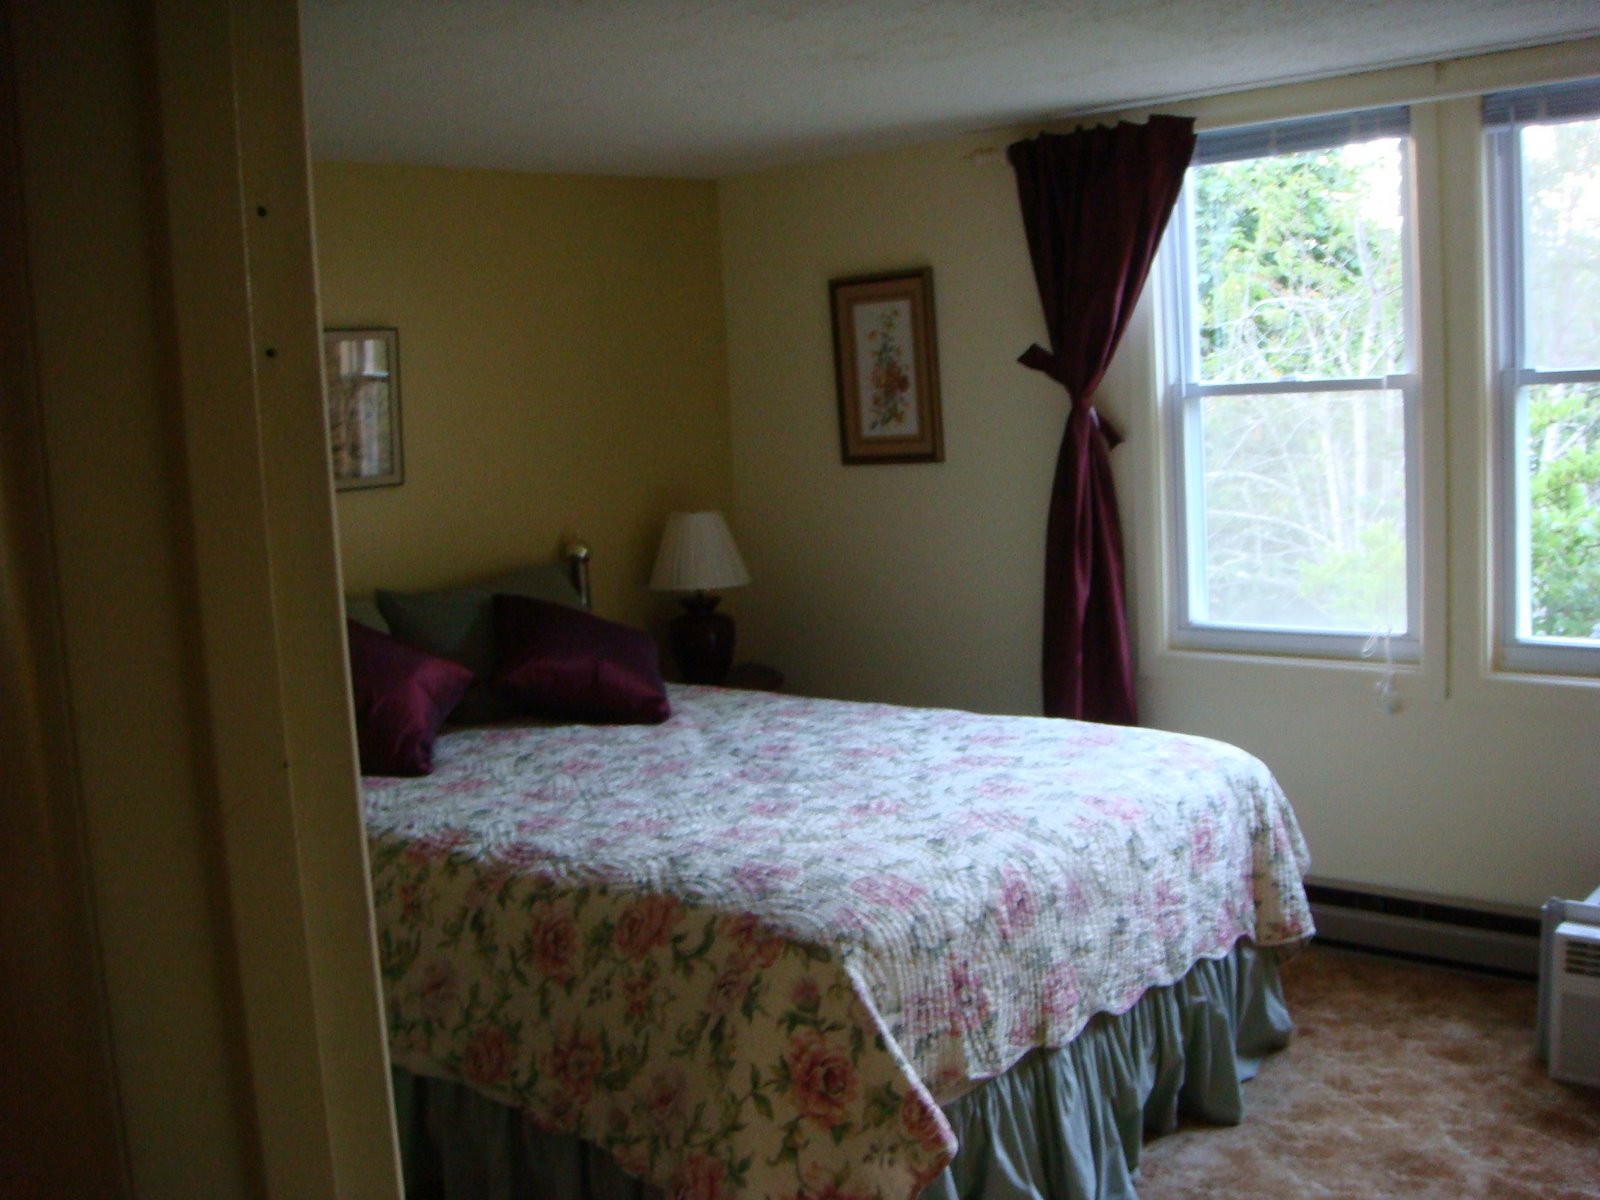 [rose+and+guest+bedroom+035.JPG]